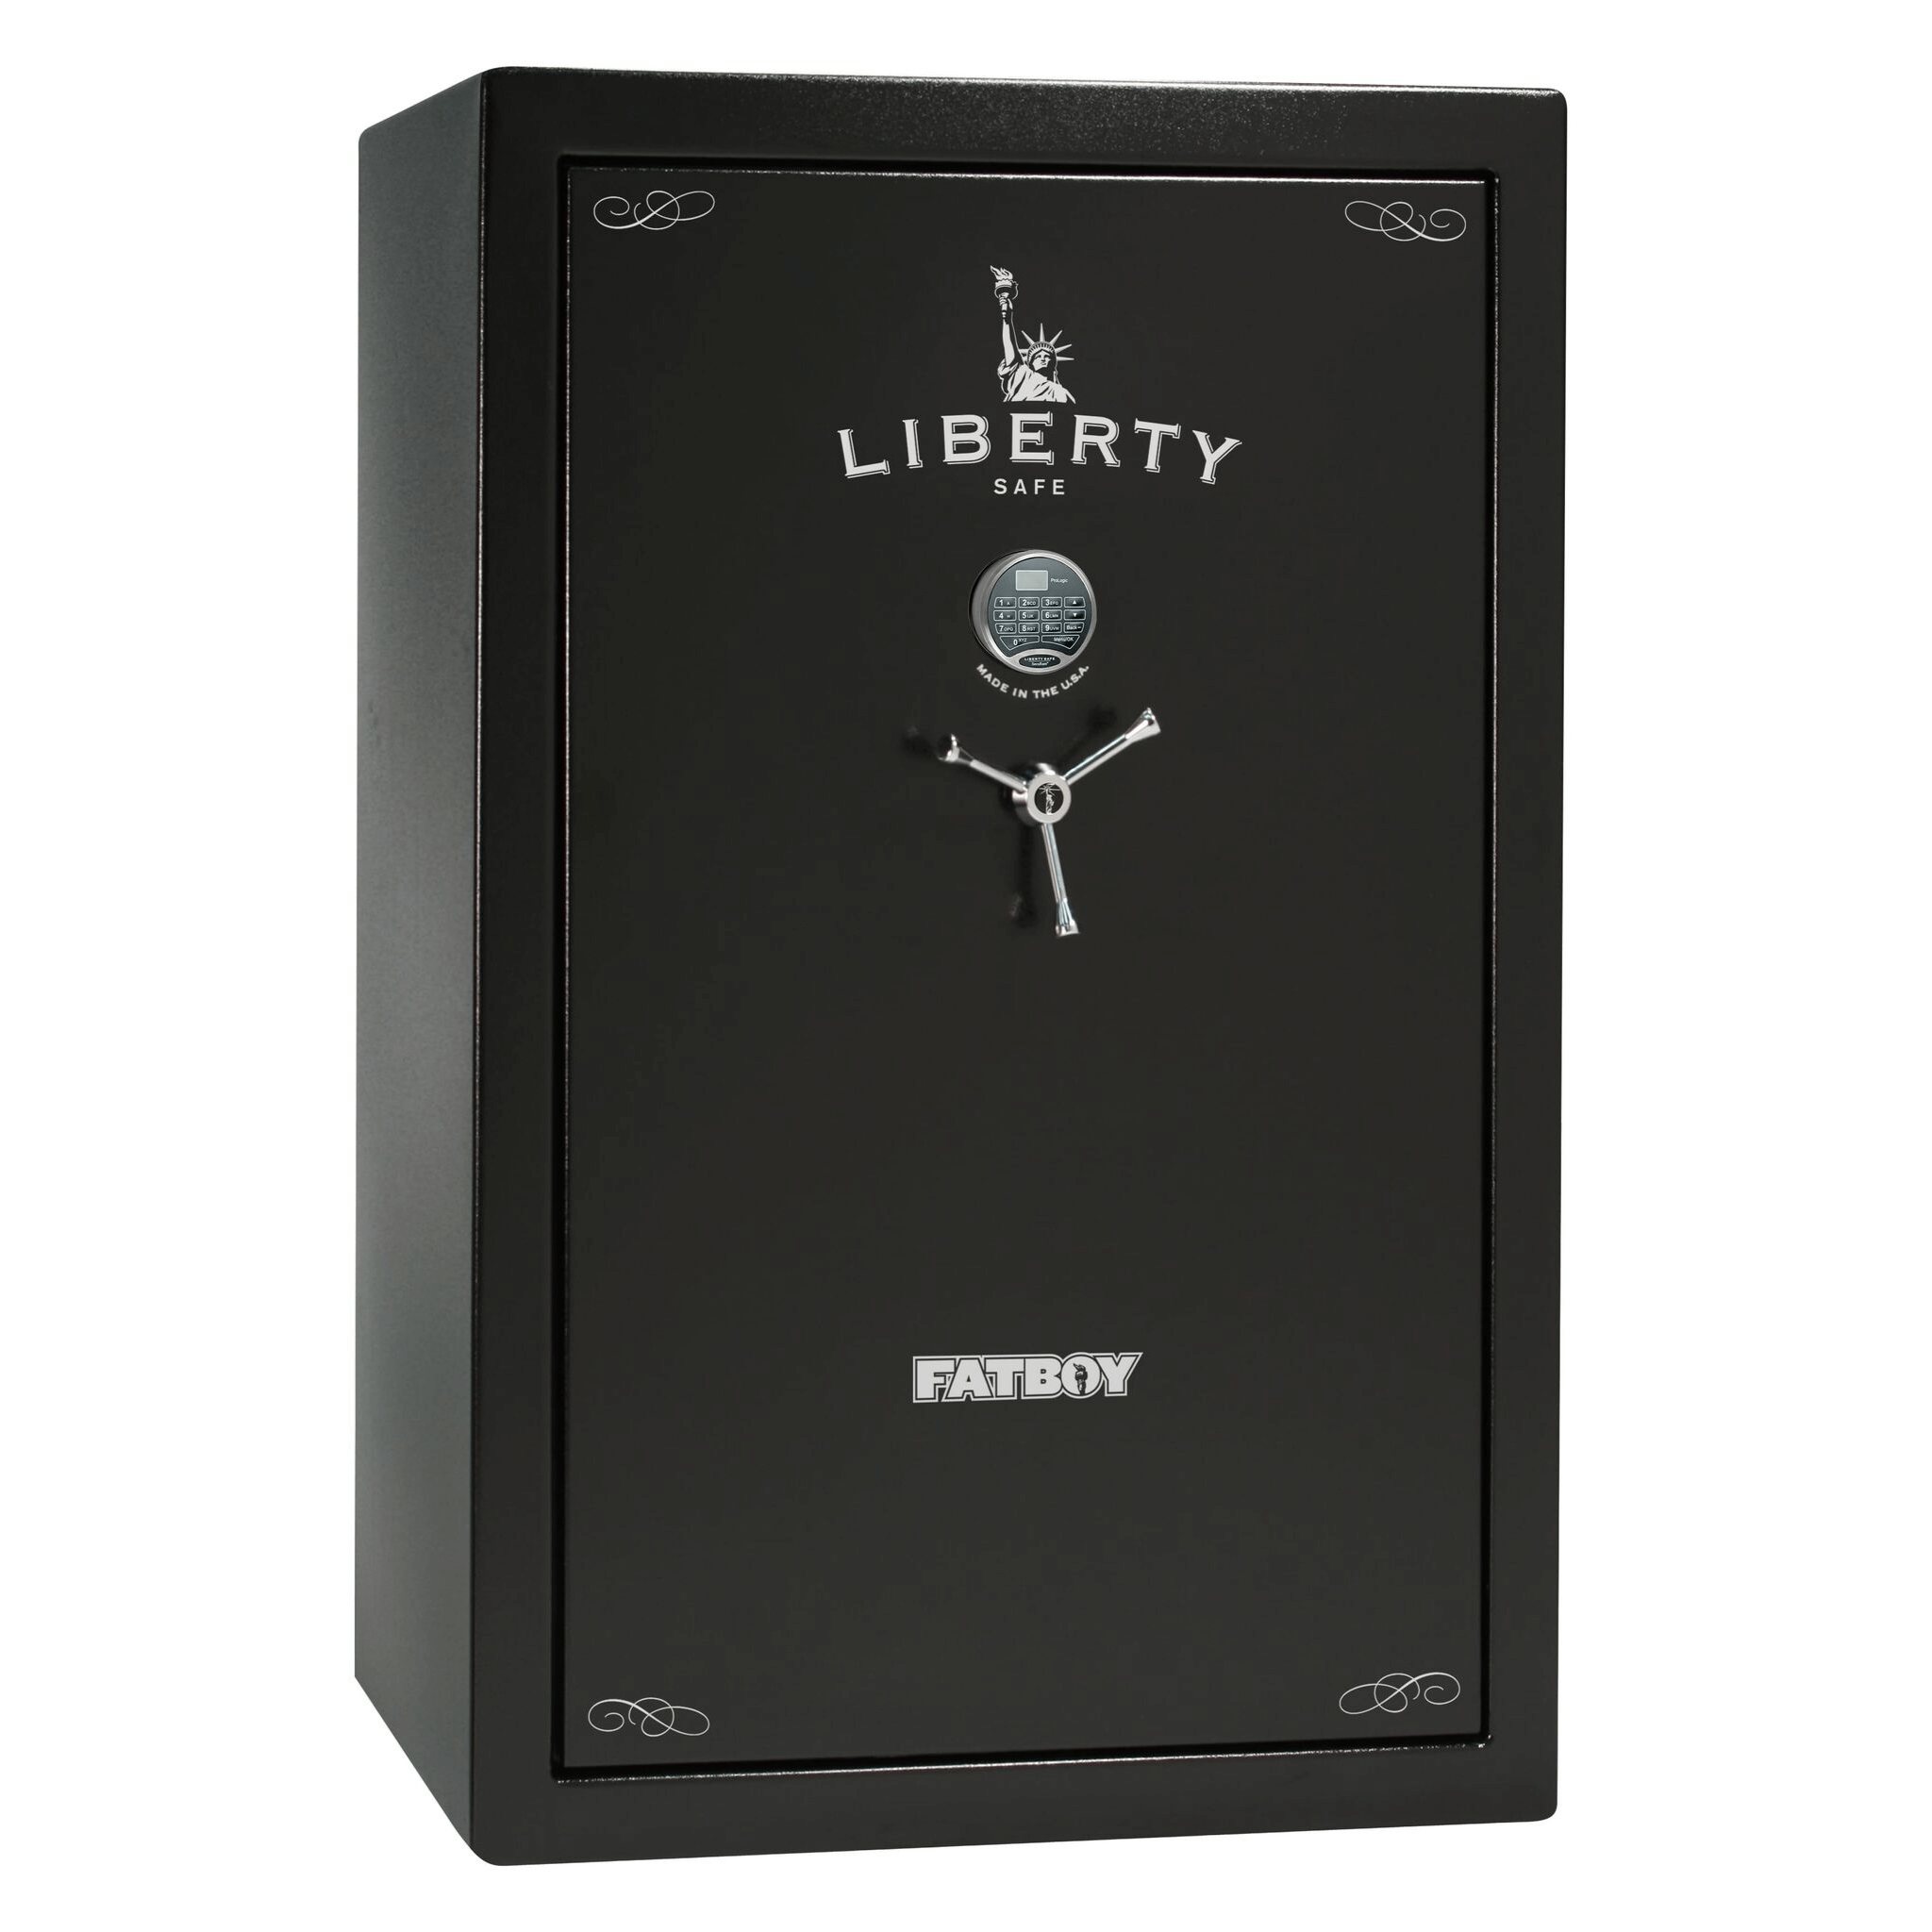 Fatboy Series | Level 4 Security | 90 Minute Fire Protection | 64 | Dimensions: 60.5"(H) x 42"(W) x 32"(D) | Black Textured | Mechanical Lock, photo 19